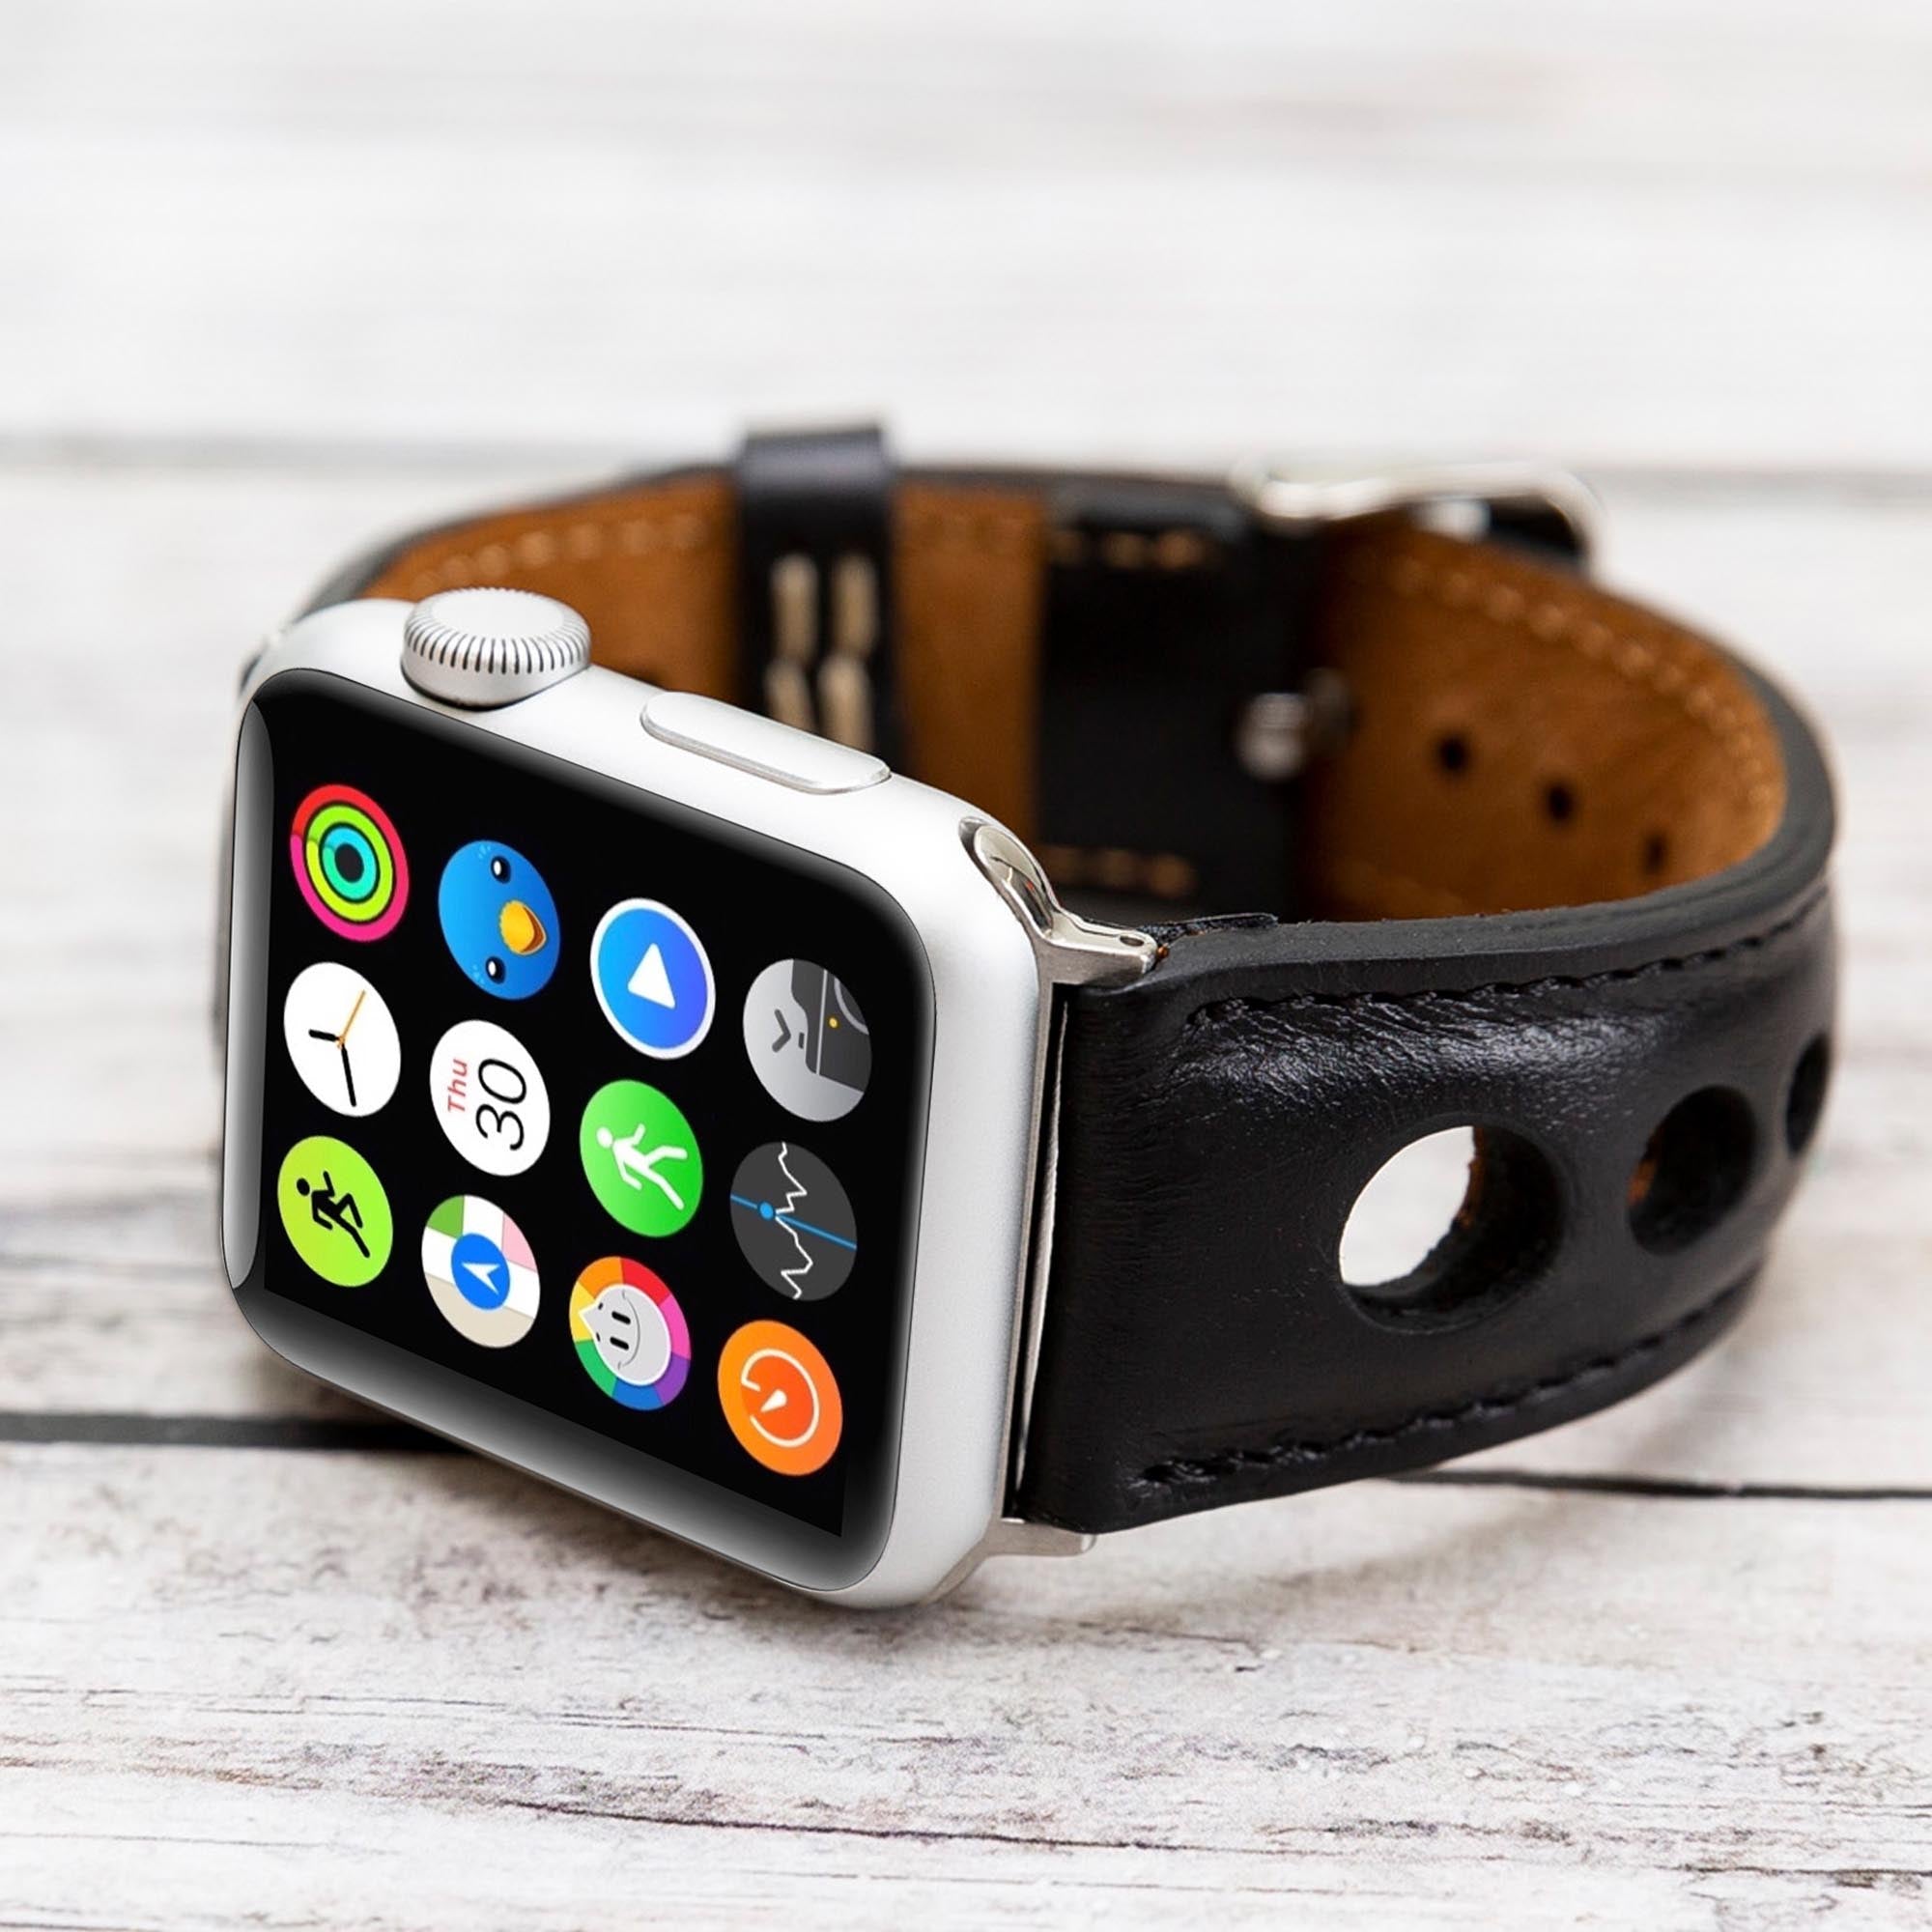 Holo Strap: Full Grain Leather Band for Apple Watch 38mm / 40mm - BLACK - saracleather